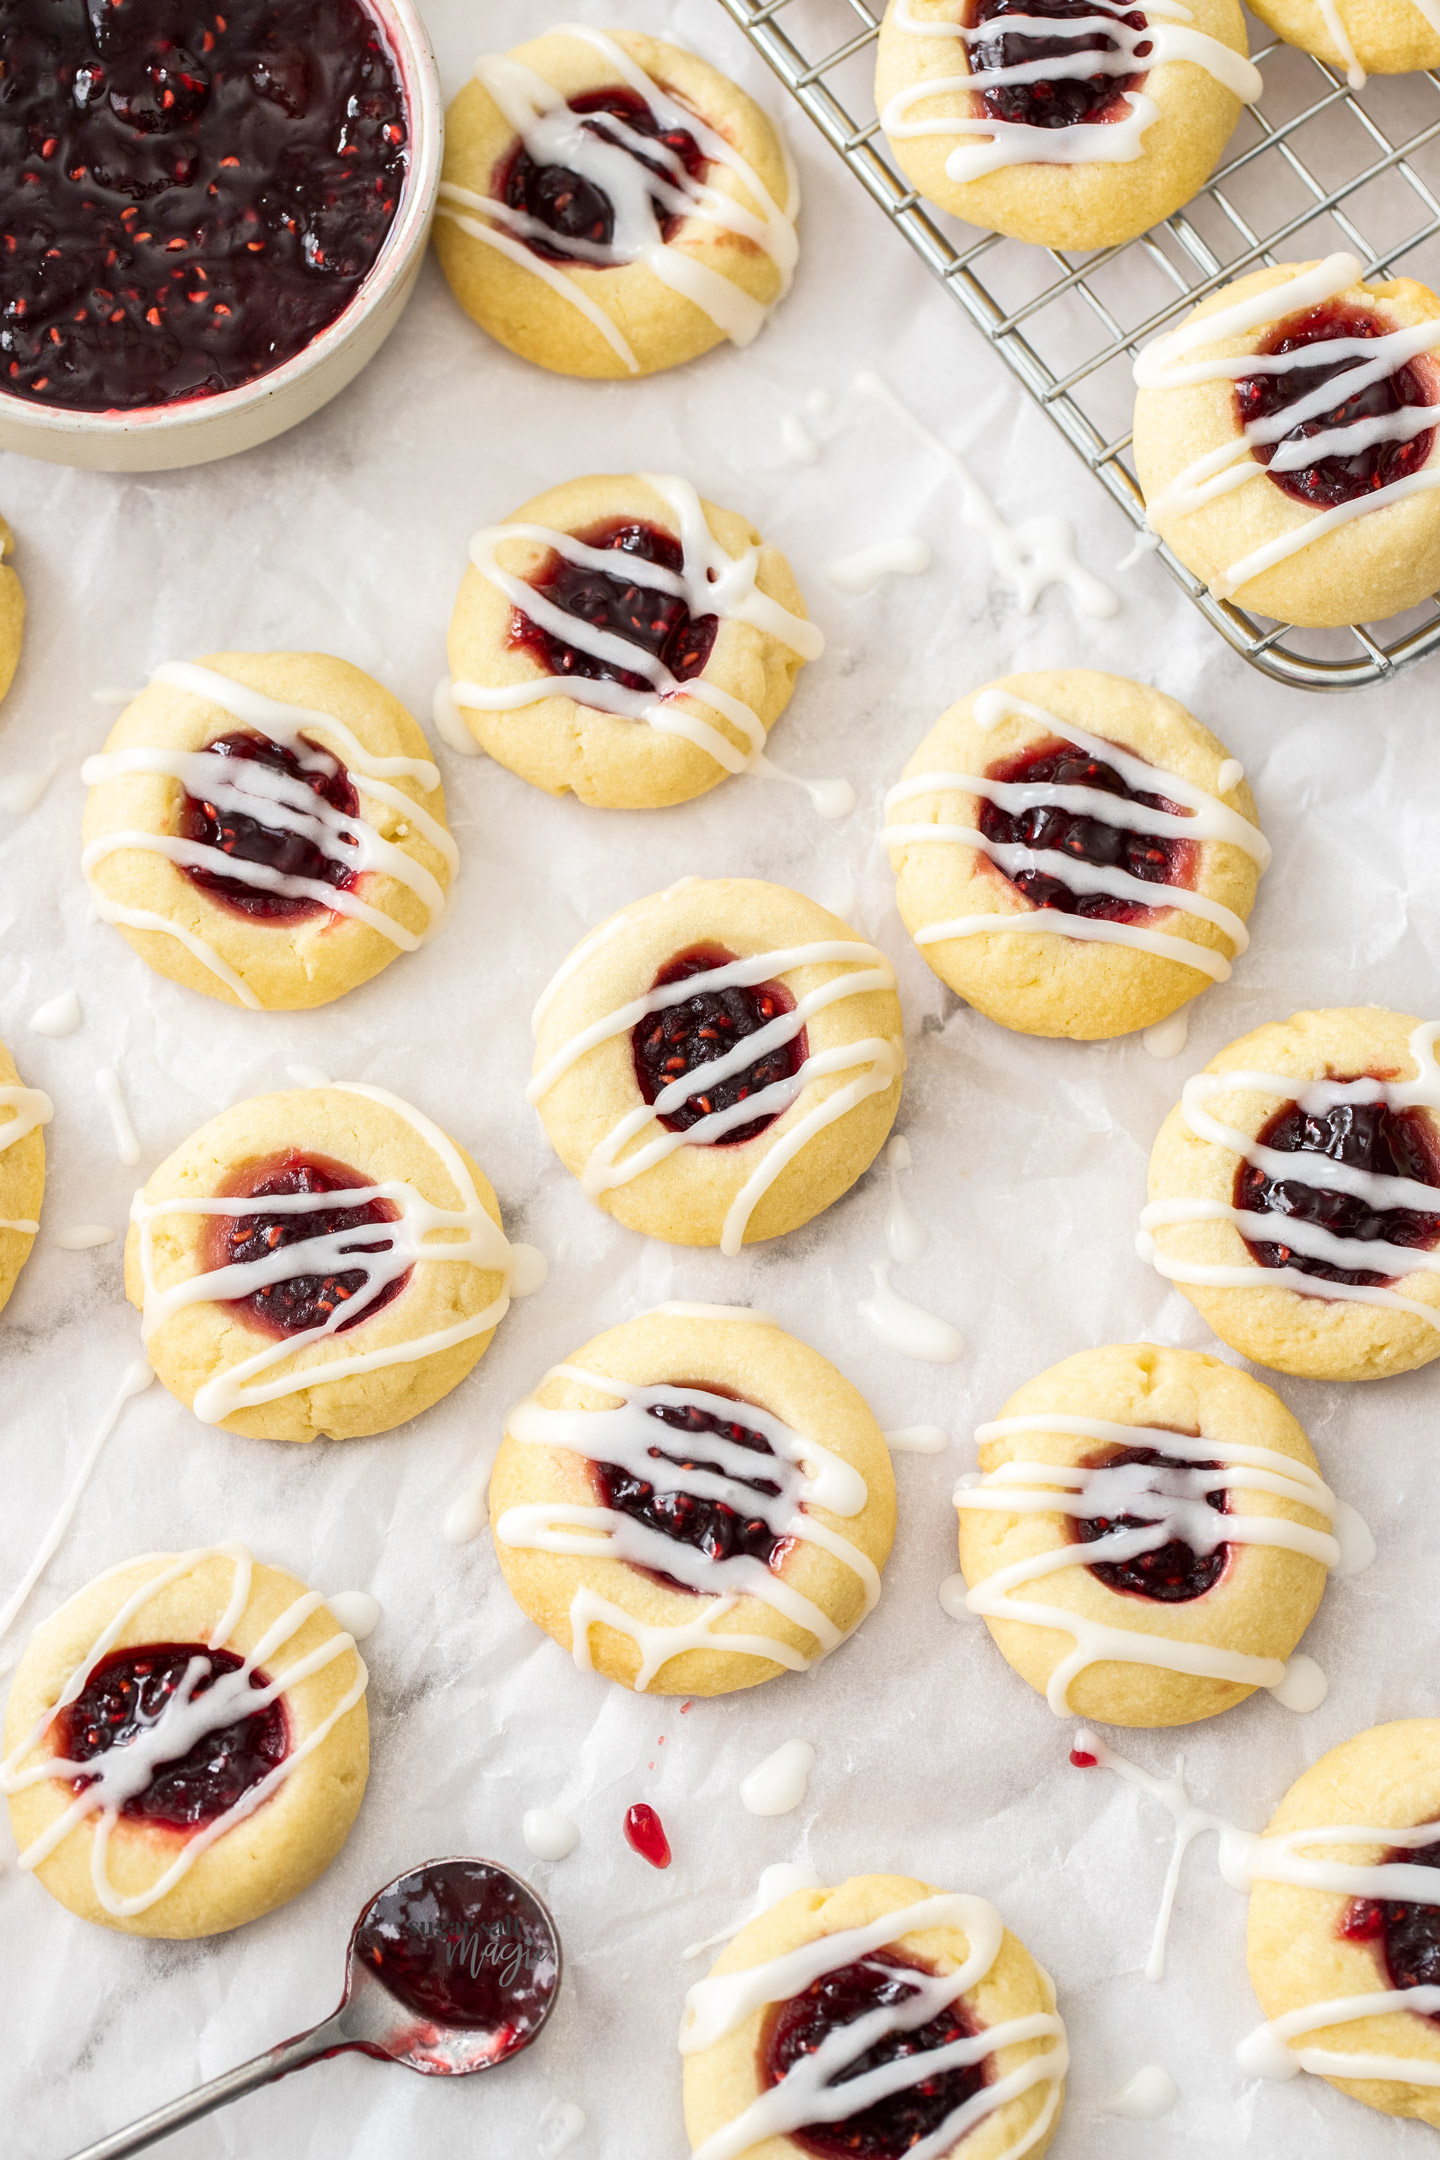 A batch of thumbprint cookies on a sheet of baking paper.